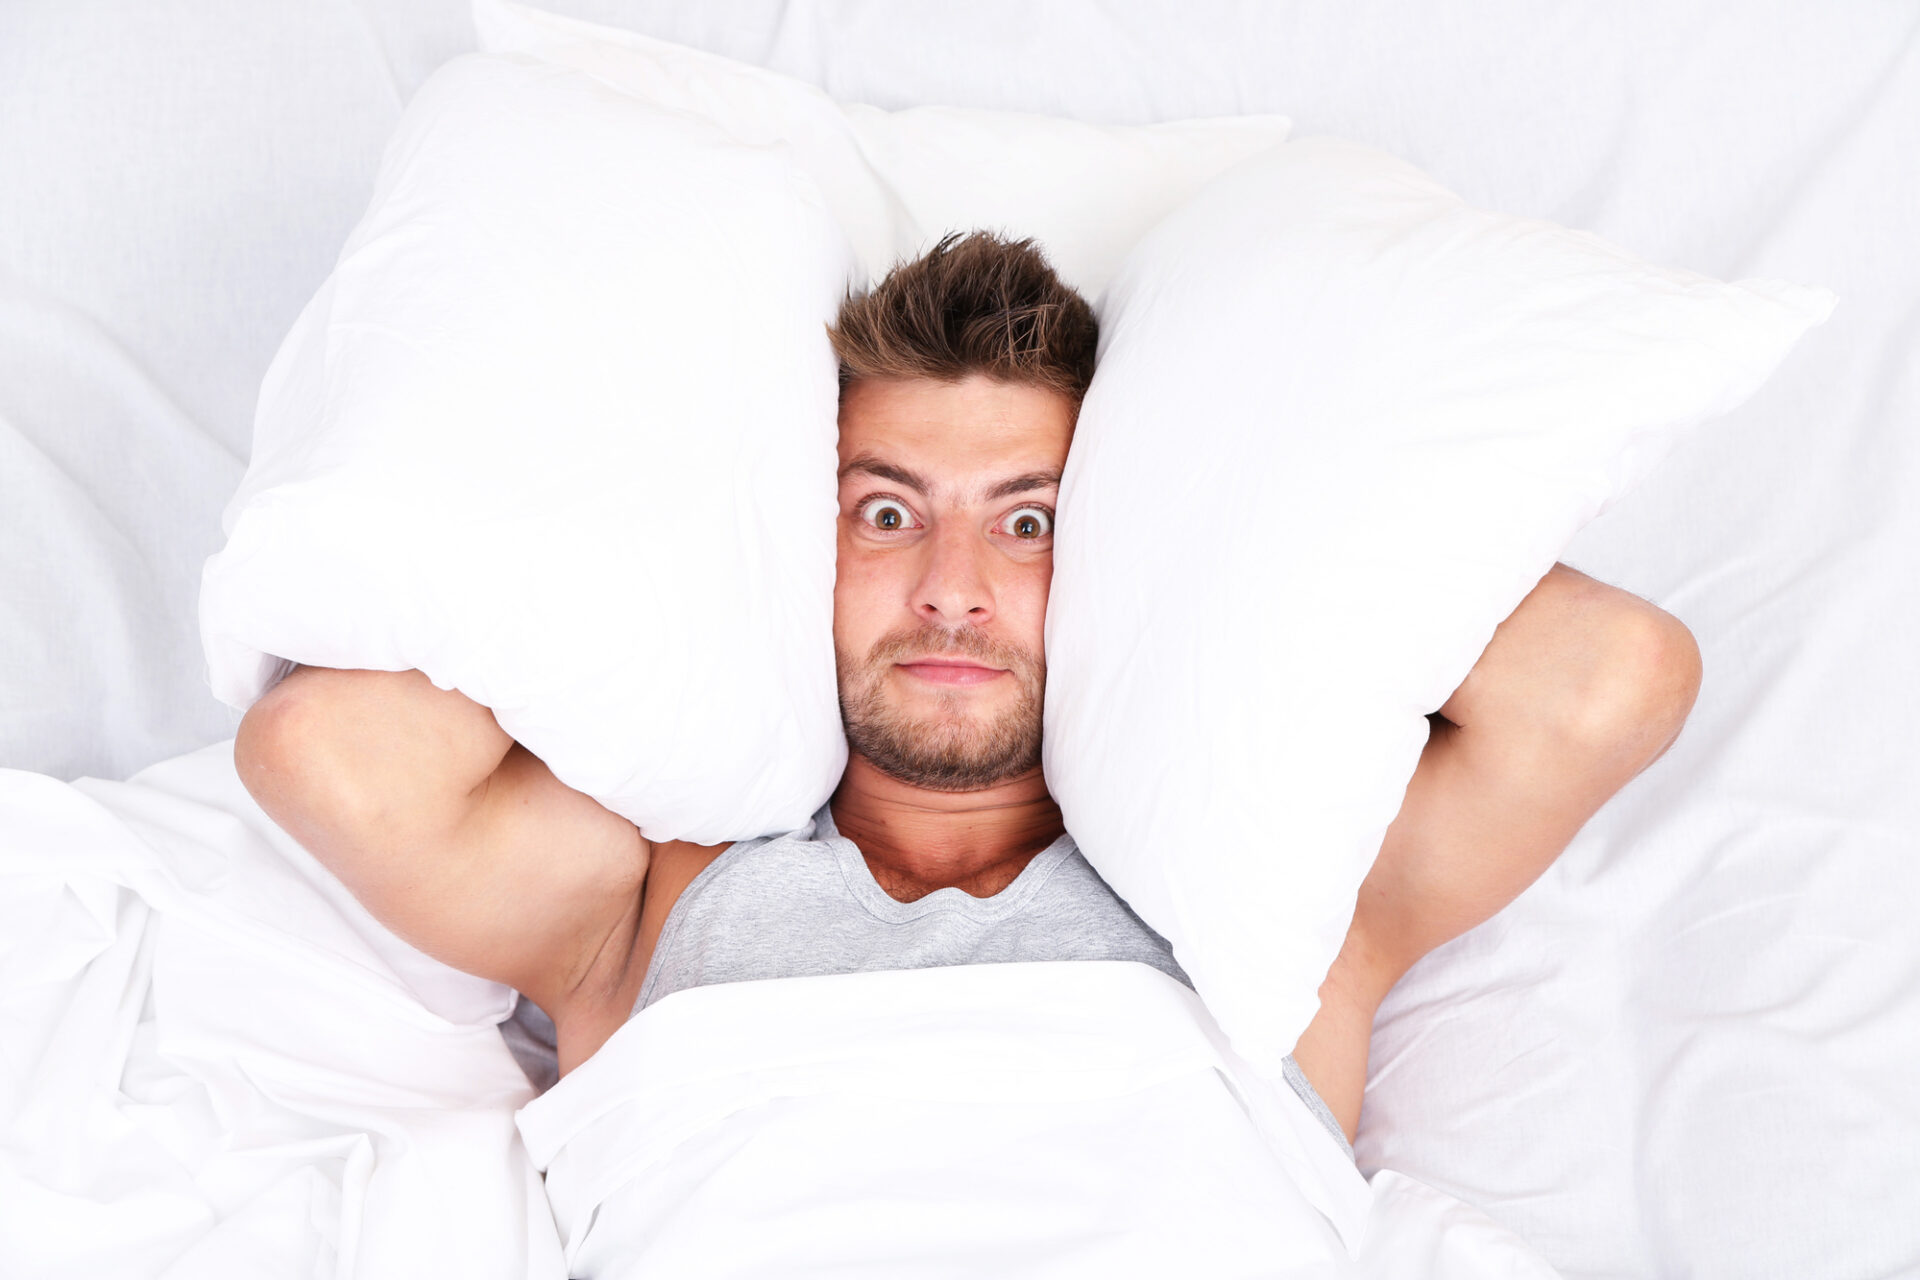 Gifts for people who have trouble sleeping